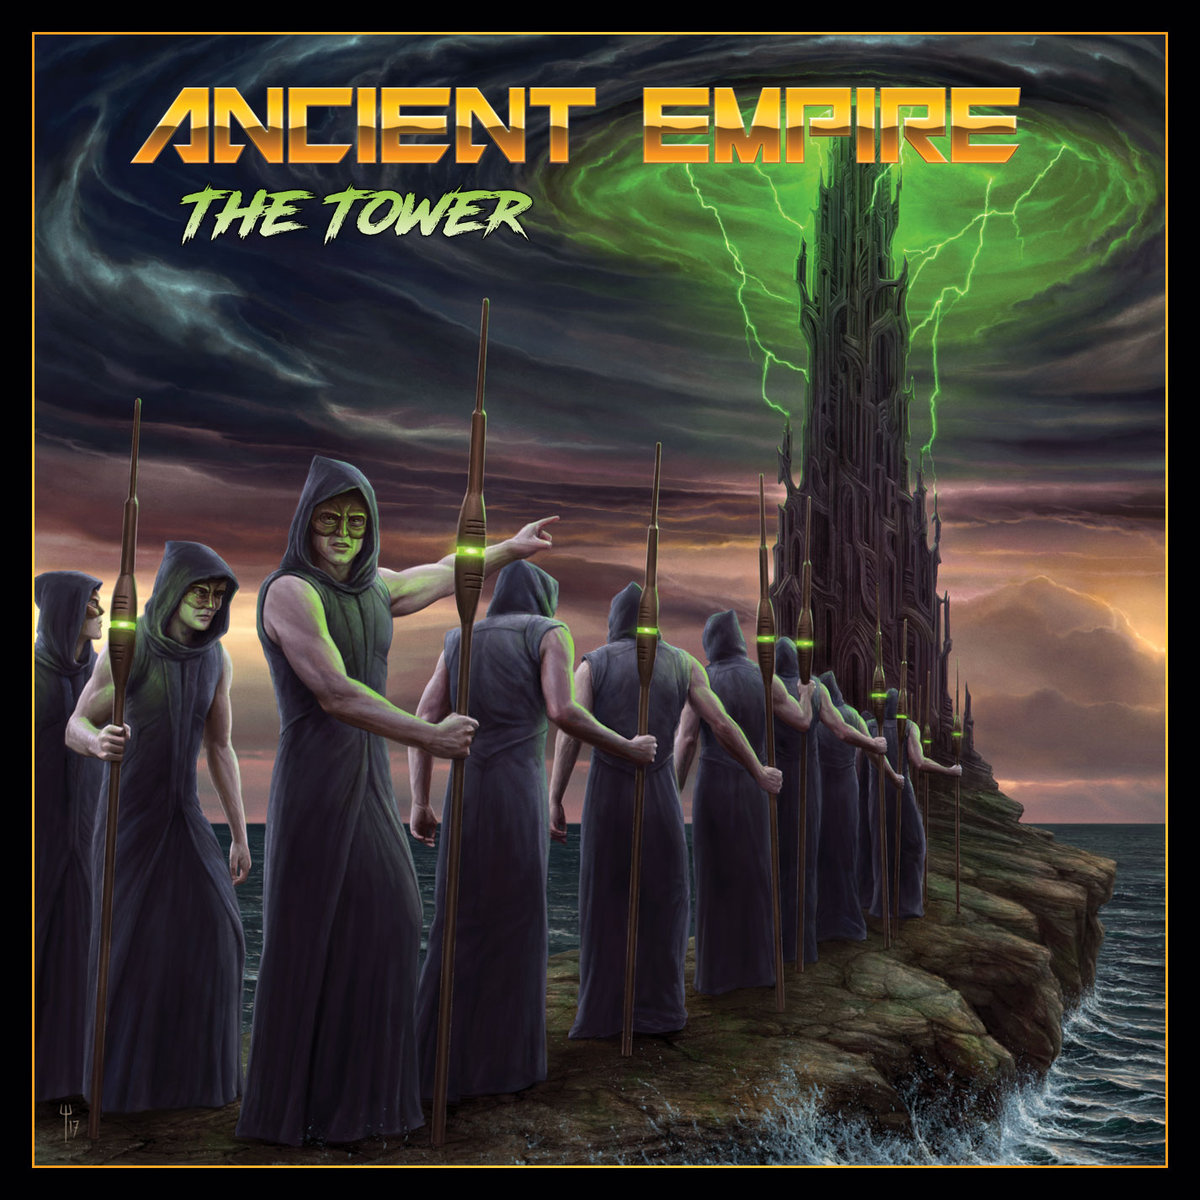 ANCIENT EMPIRE / THE TOWER